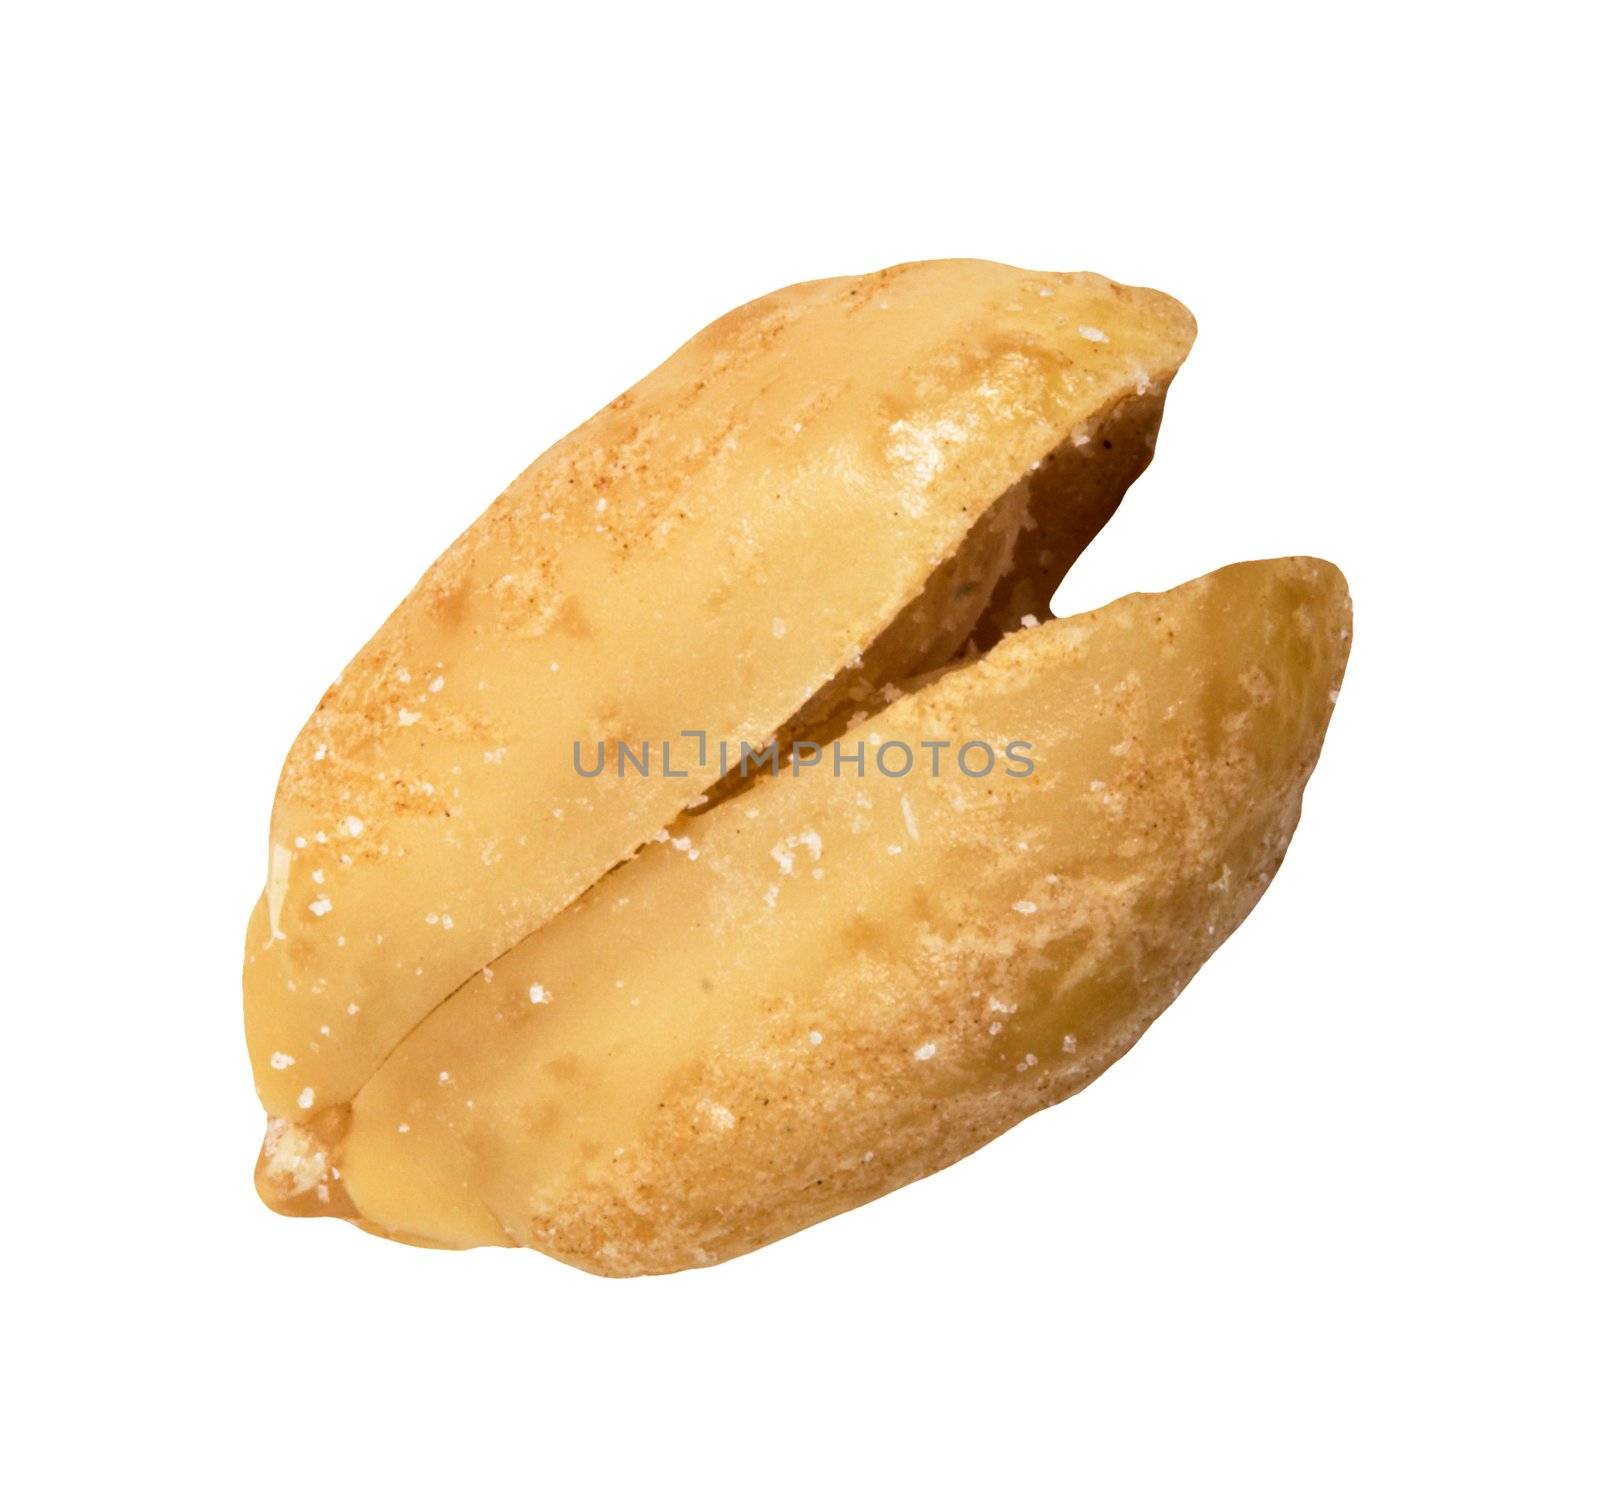 A peanut isolated on a white background